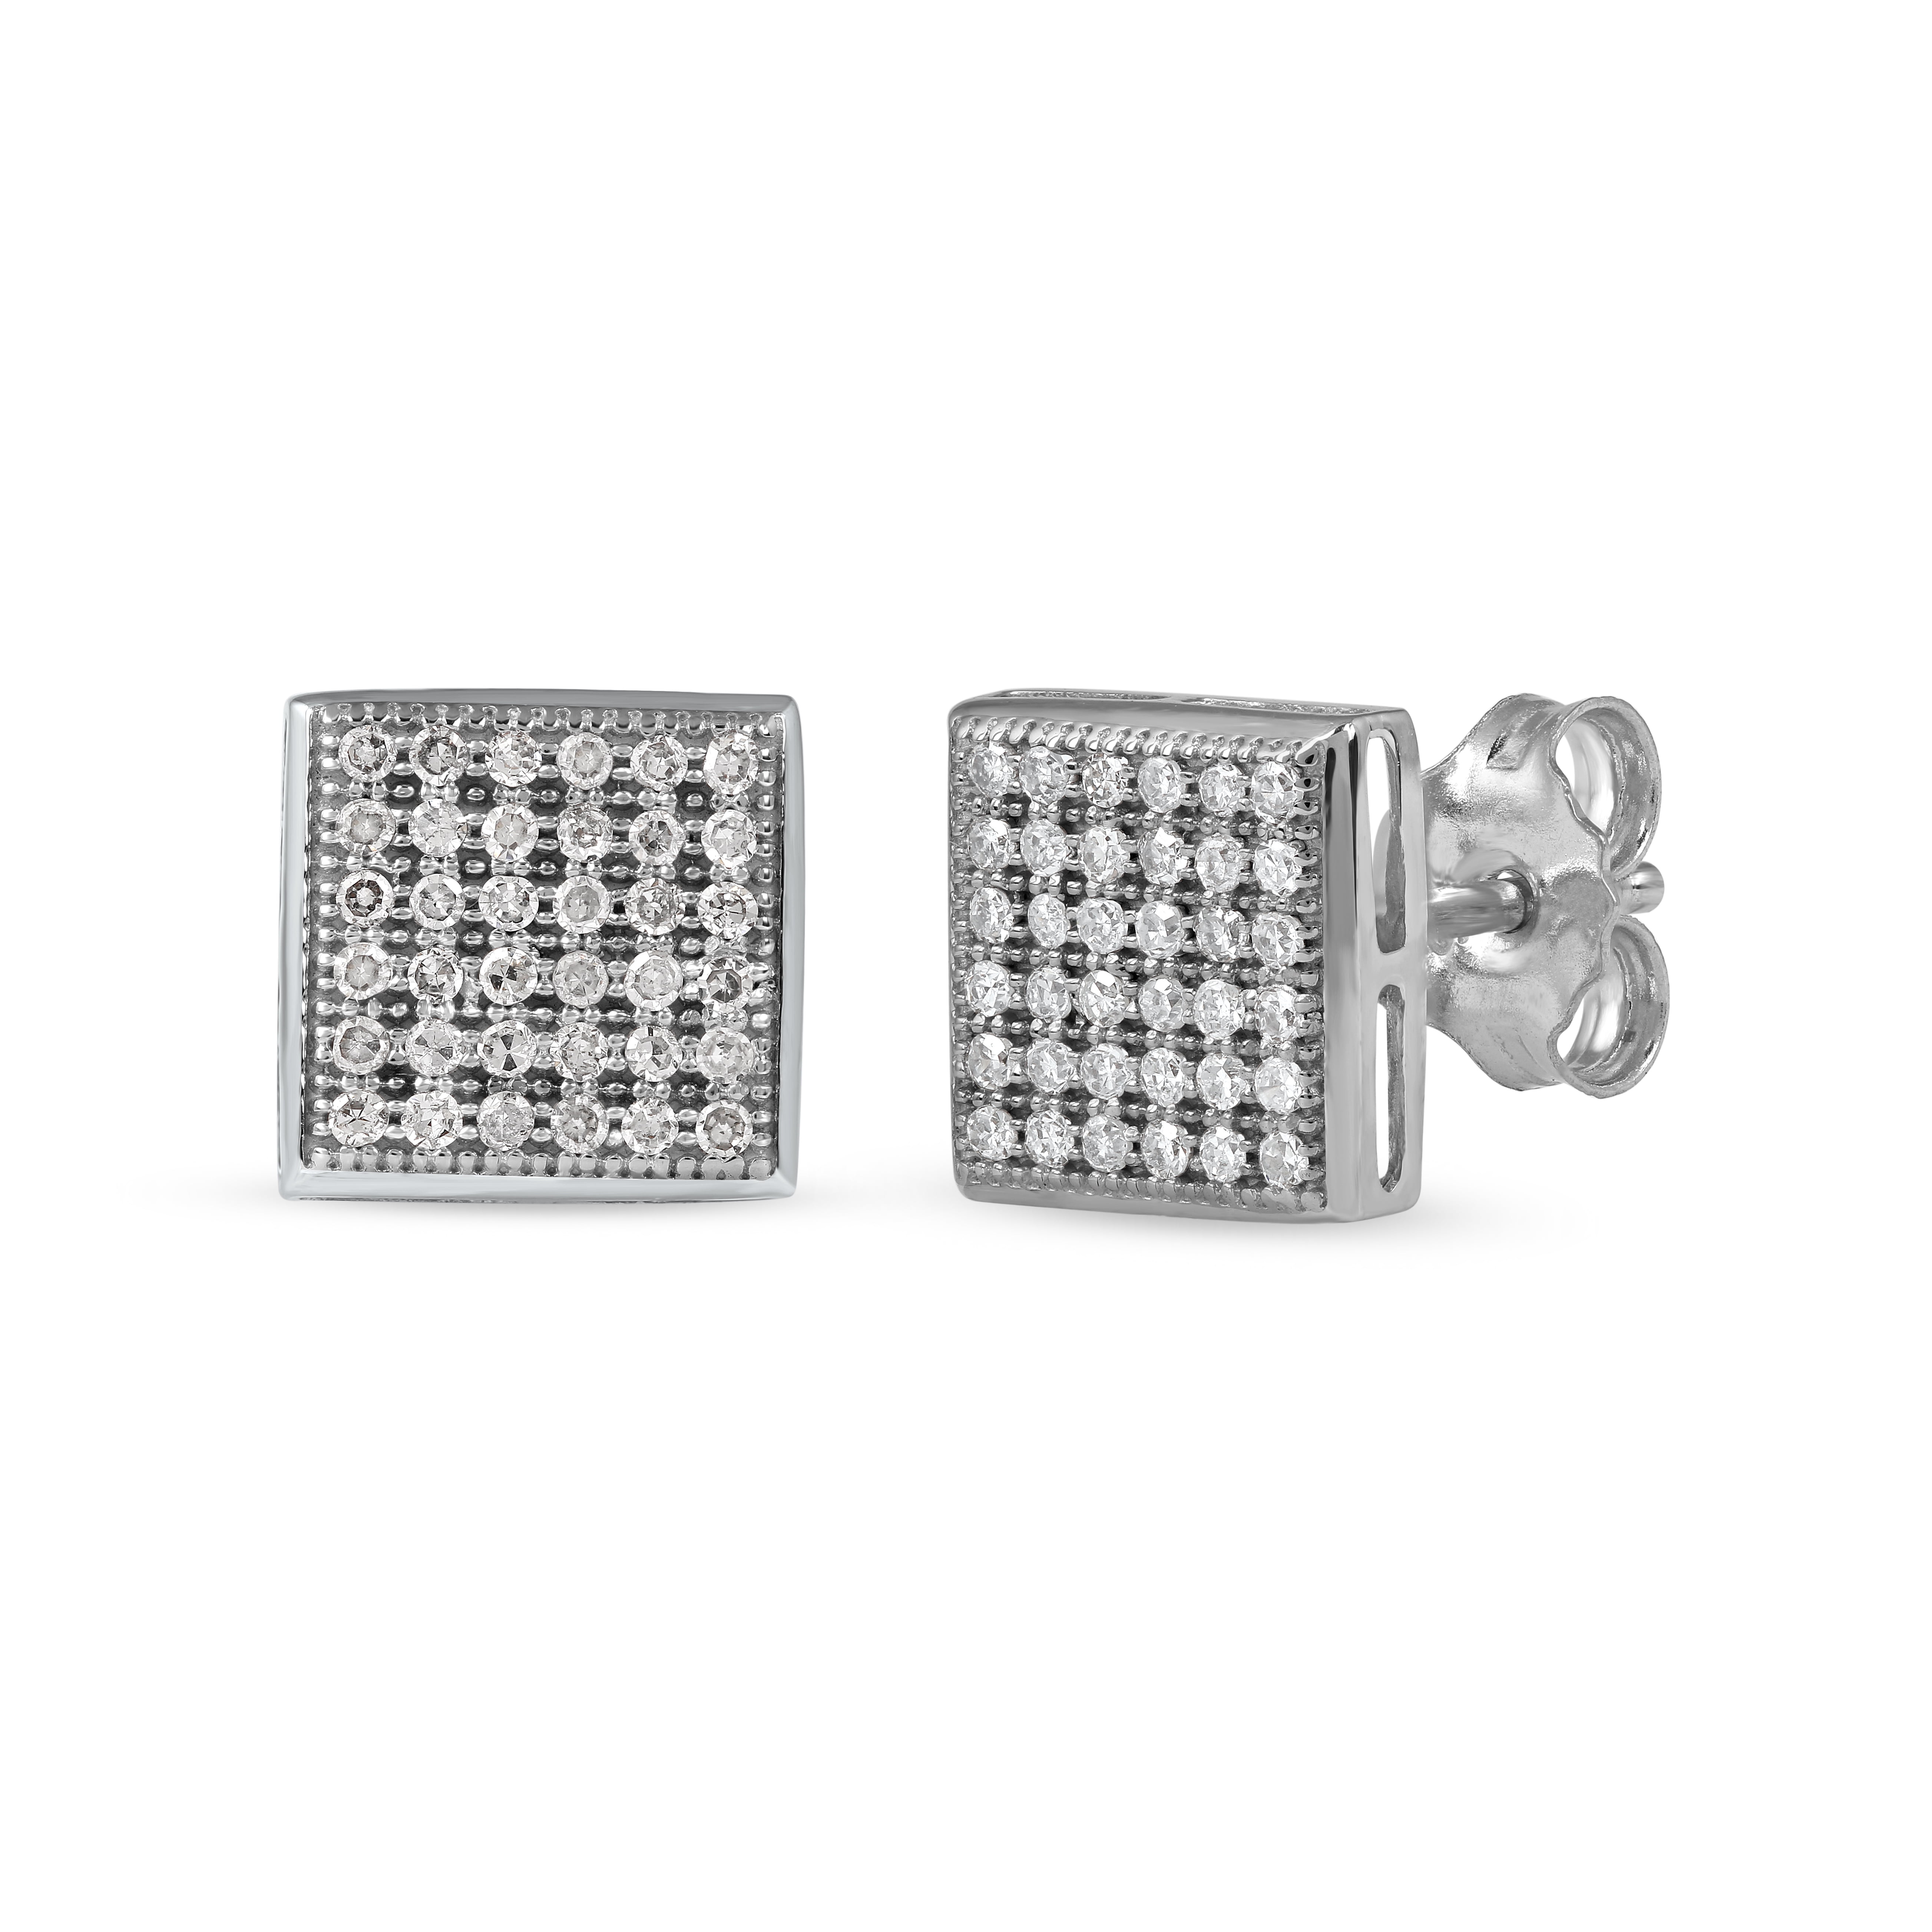 Mens Ladies Solid 925 Sterling Silver Iced Earrings Cube Studs Small 1/4